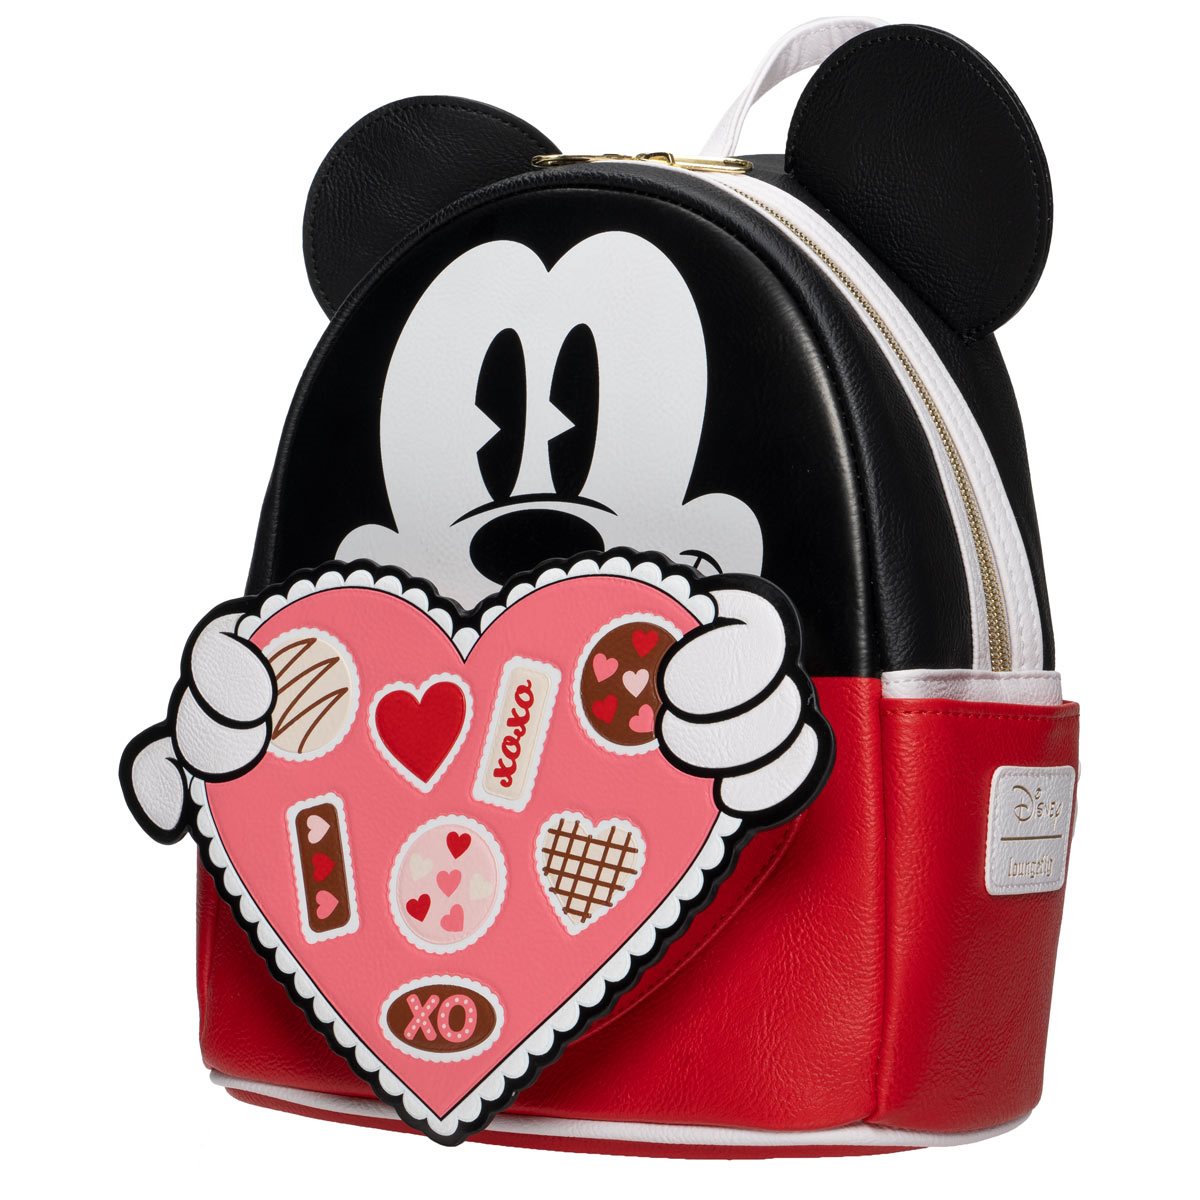 Mickey Mouse Valentine (Disney) EE Exclusive Mini Backpack by Loungefly